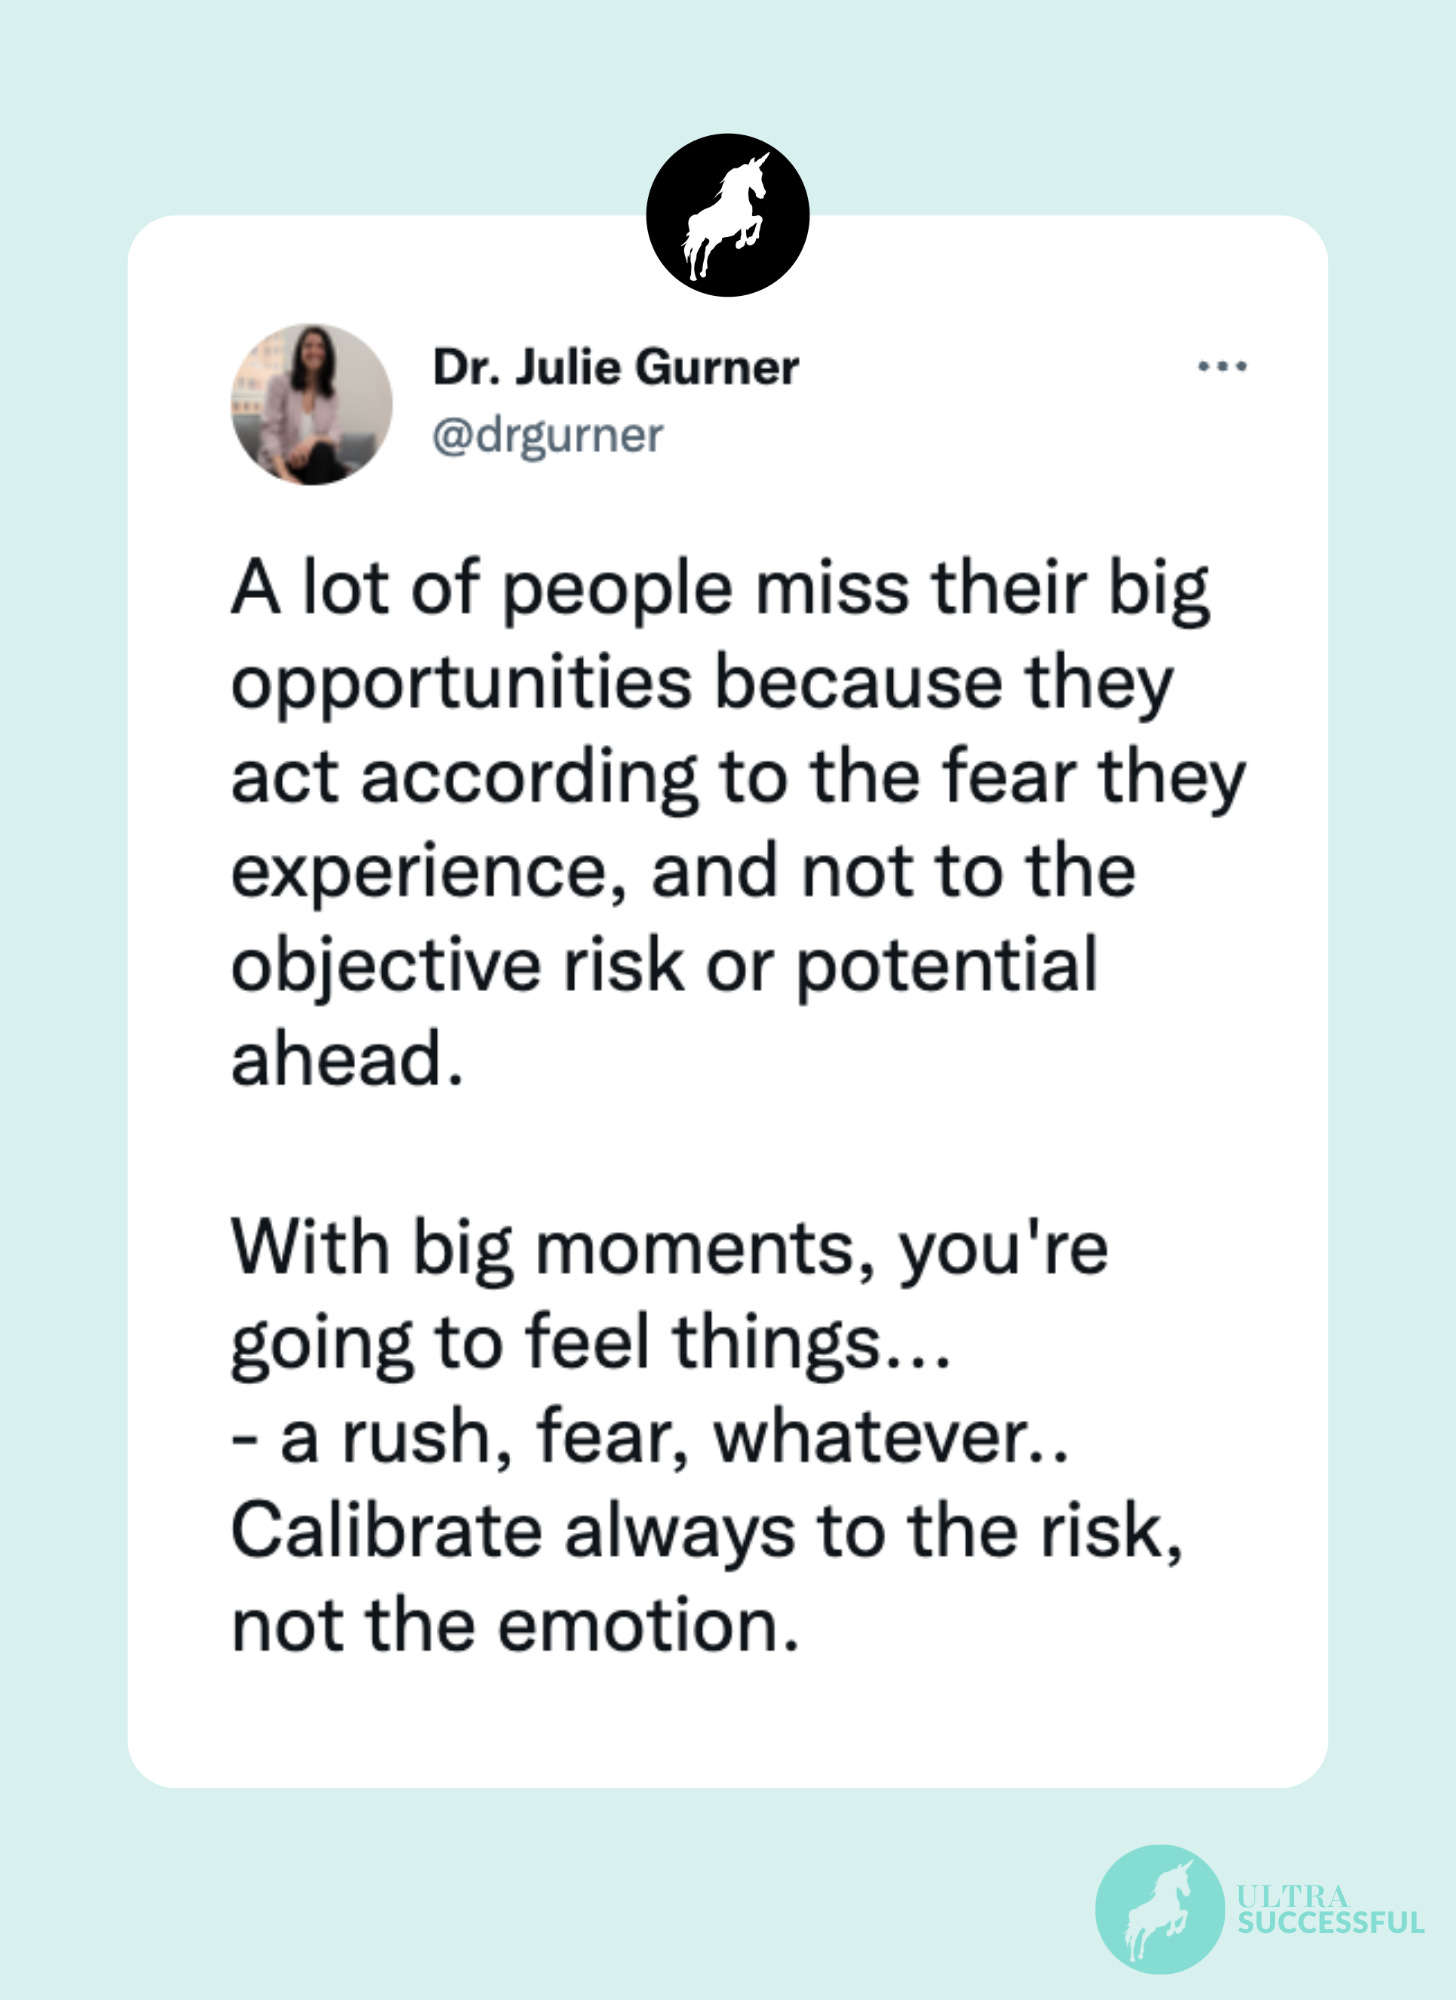 @drgurner: A lot of people miss their big opportunities because they act according to the fear they experience, and not to the objective risk or potential ahead.    With big moments, you're going to feel things... - a rush, fear, whatever.. Calibrate always to the risk, not the emotion.